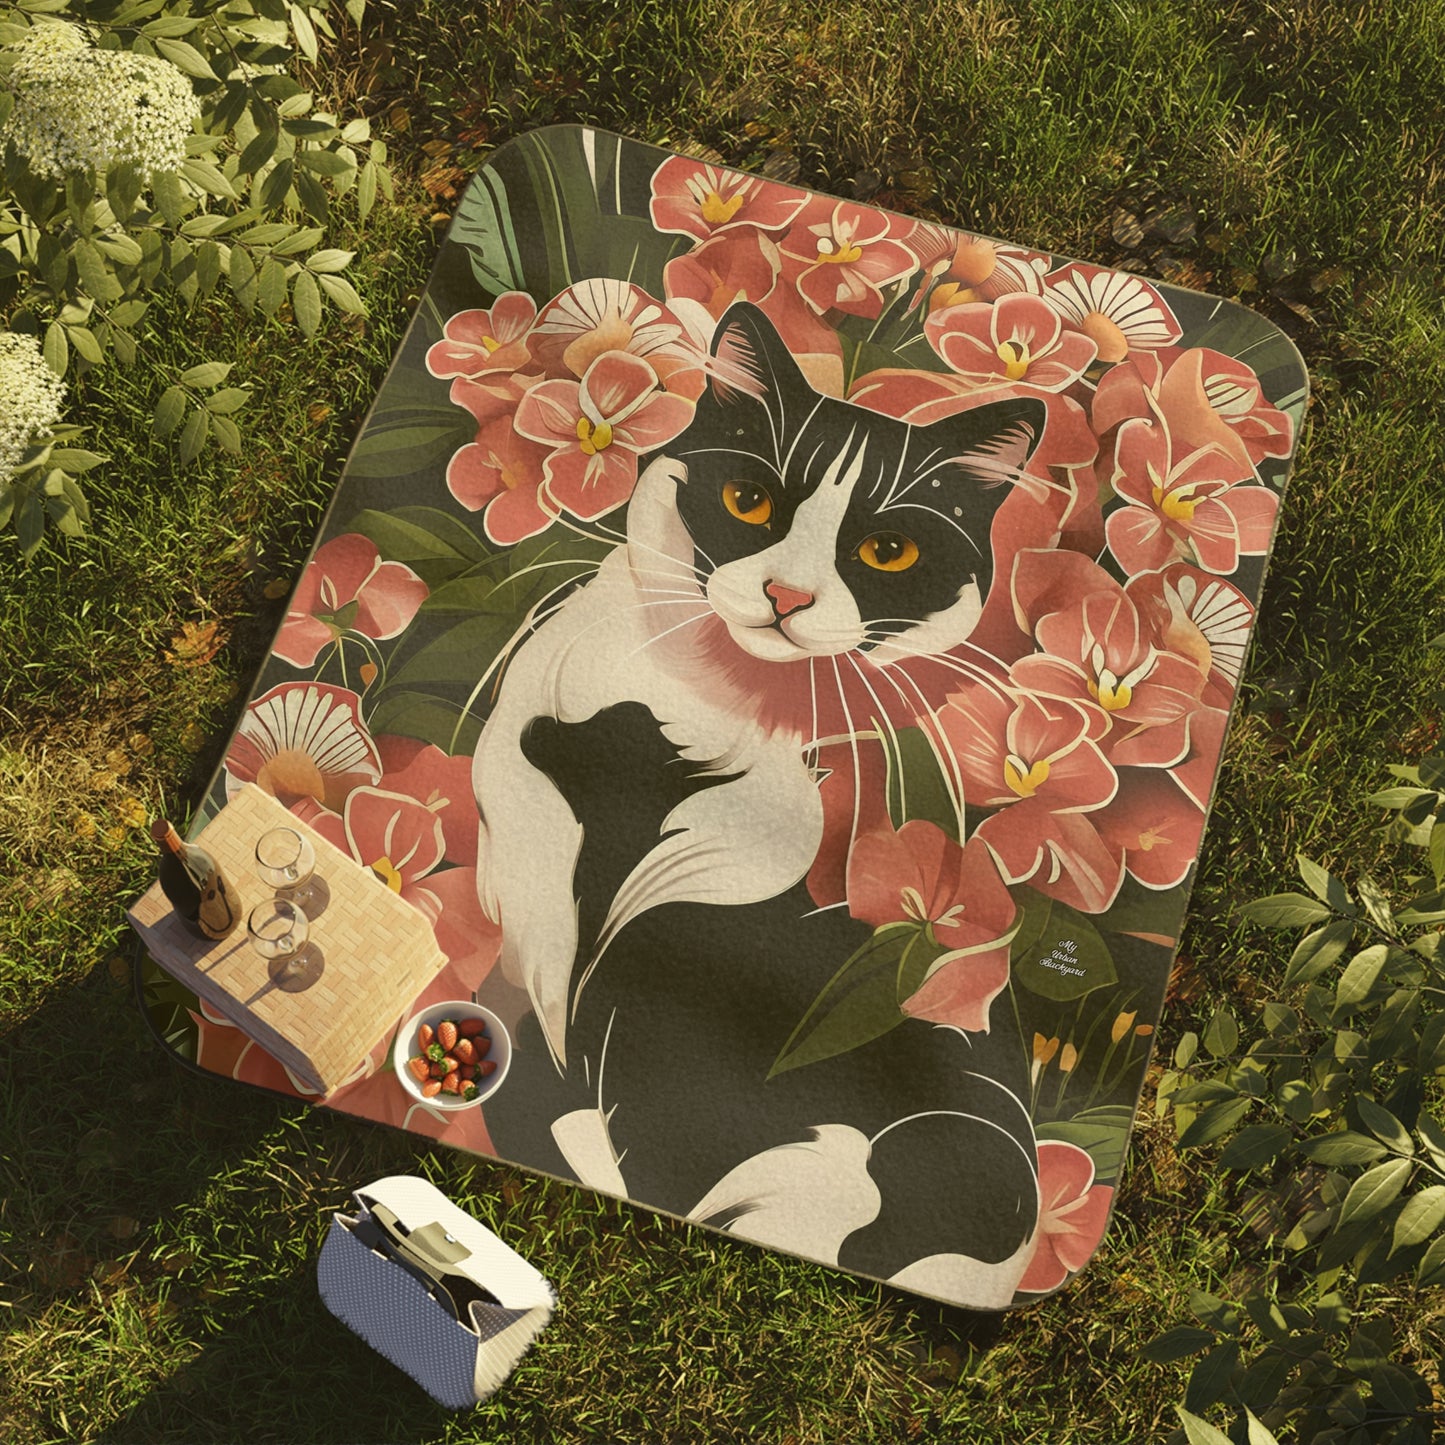 Black & White Cat in Flowers, Cozy Outdoor Picnic Blanket, Water-Resistant Bottom, 51" × 61"